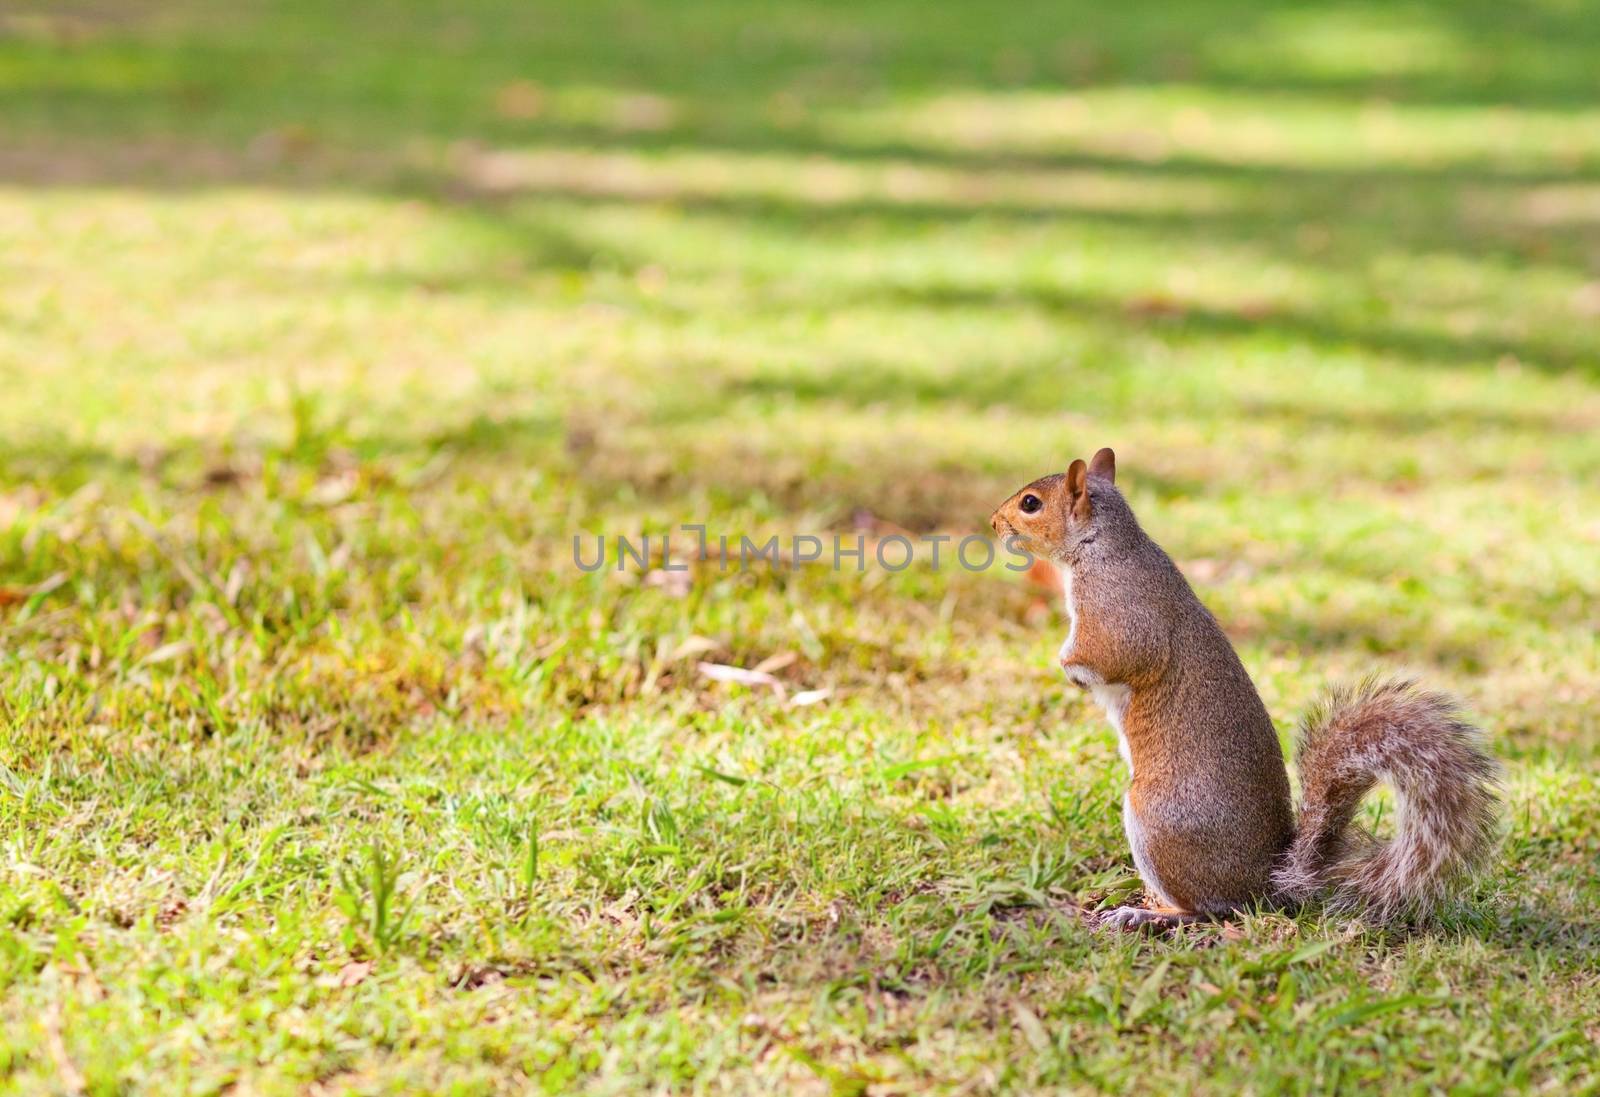 Squirrel in the park by Wavebreakmedia